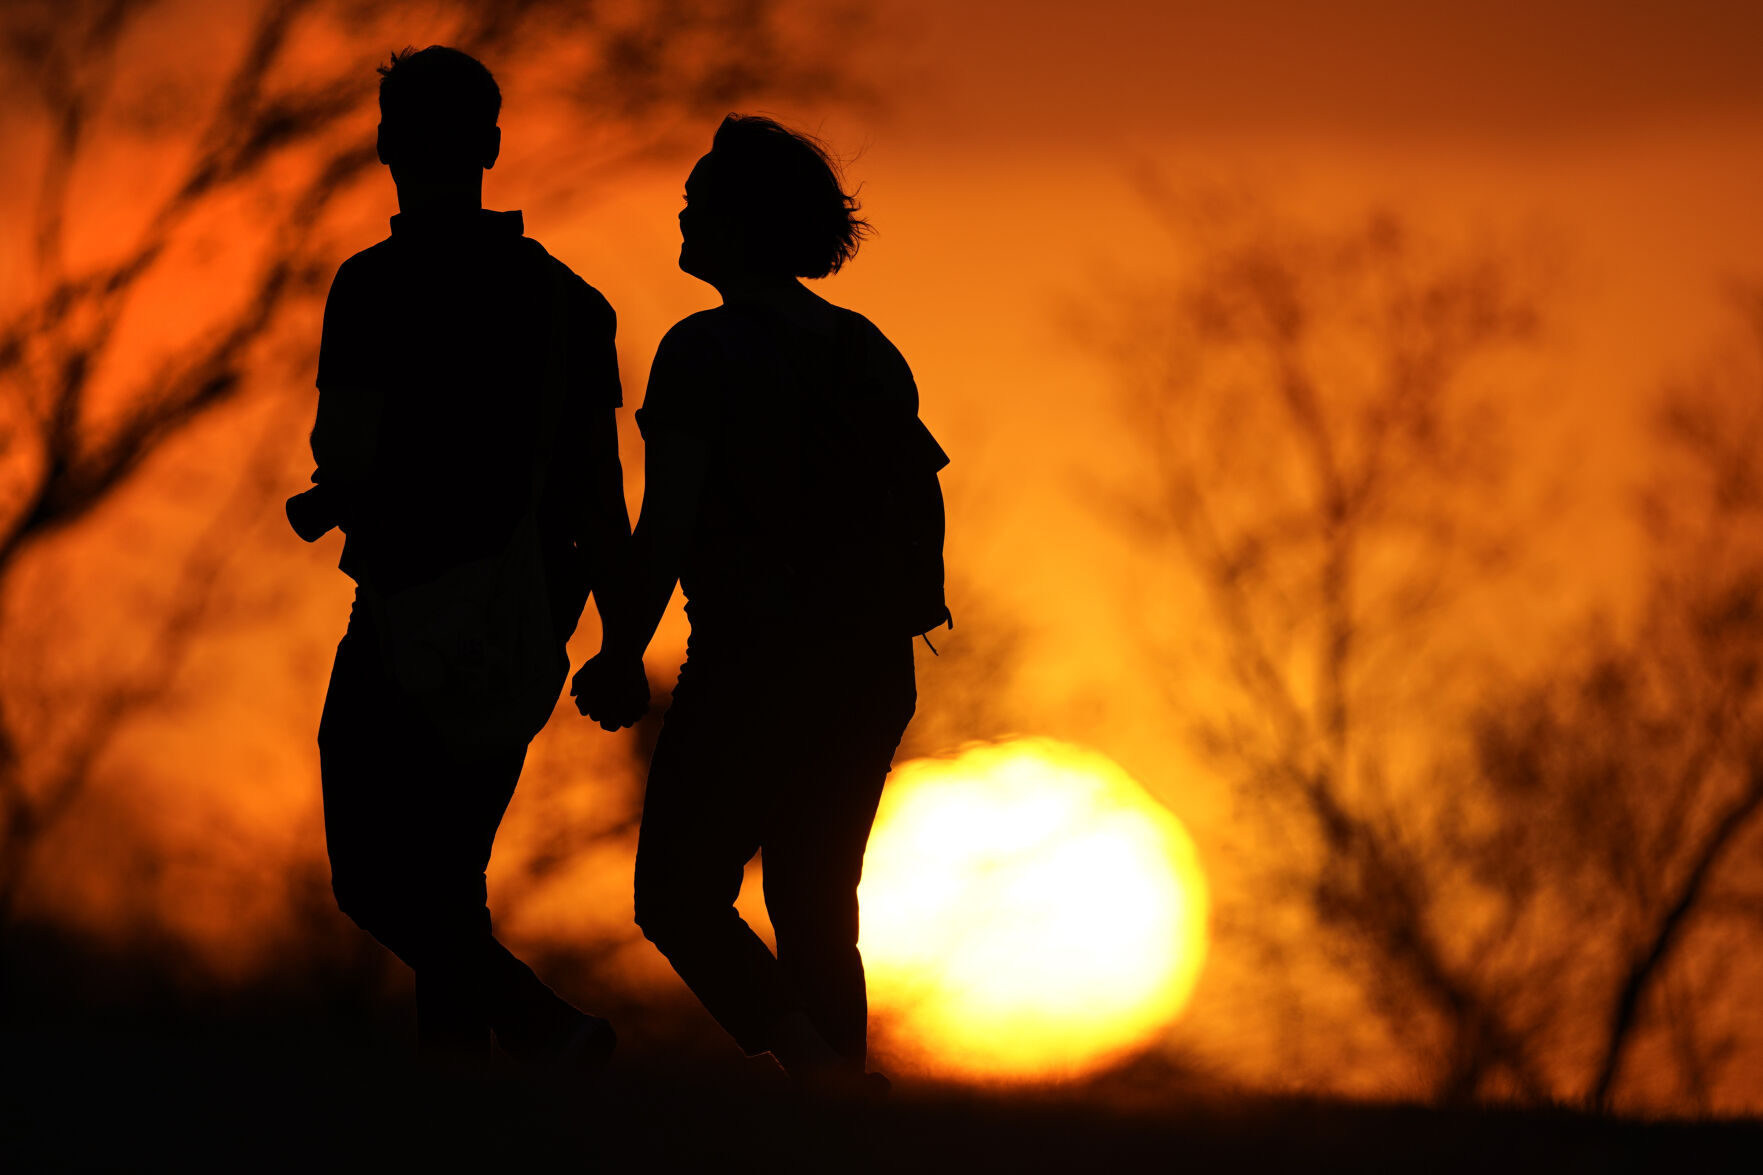 <p>FILE - A couple walks through a park at sunset, March 10, 2021, in Kansas City, Mo. U.S. life expectancy rose in 2022 — by more than a year — after plunging two straight years at the beginning of the COVID-19 pandemic, according to a new government report released Wednesday, Nov. 29, 2023. The rise was mainly due to the waning of the pandemic in 2022, researchers said at the Centers for Disease Control and Prevention. (AP Photo/Charlie Riedel, File)</p>   PHOTO CREDIT: Charlie Riedel 